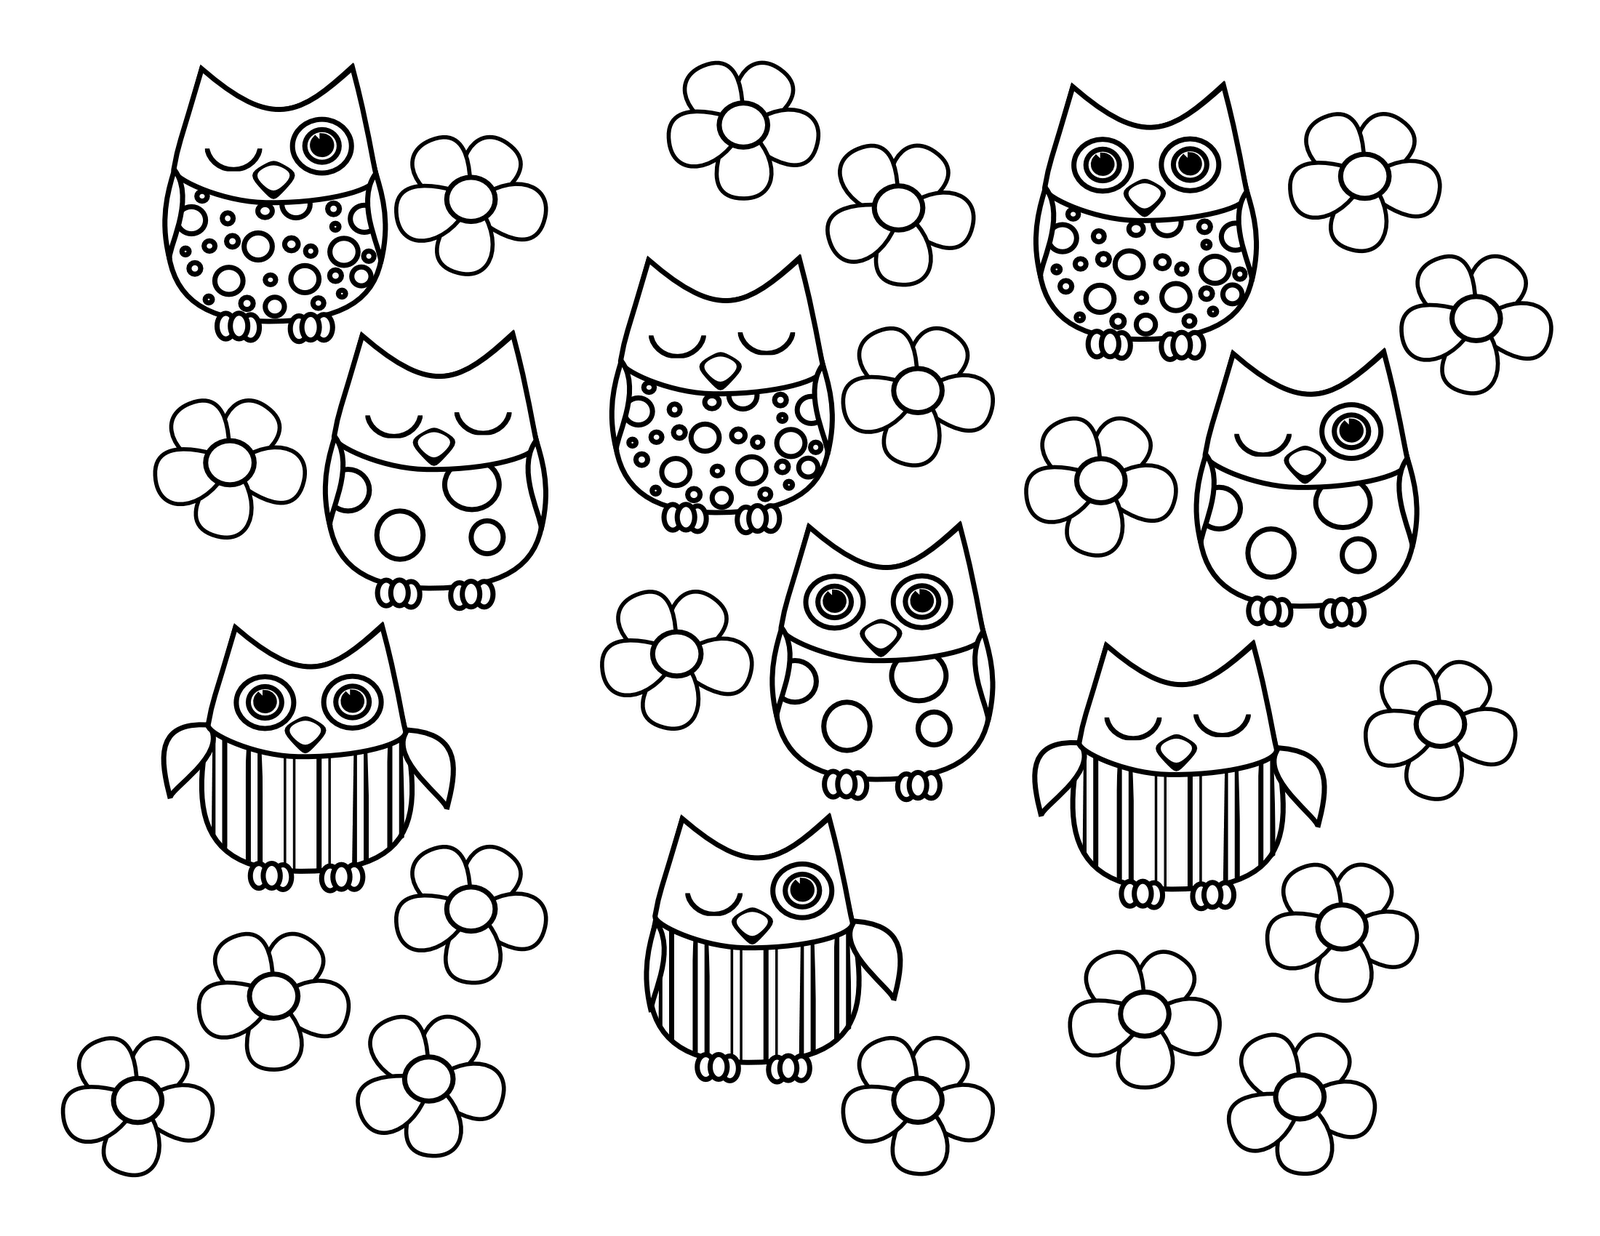 Owl Cute Sweetheart Owl Coloring Page Kiddos Origami Owl Jewelry ...